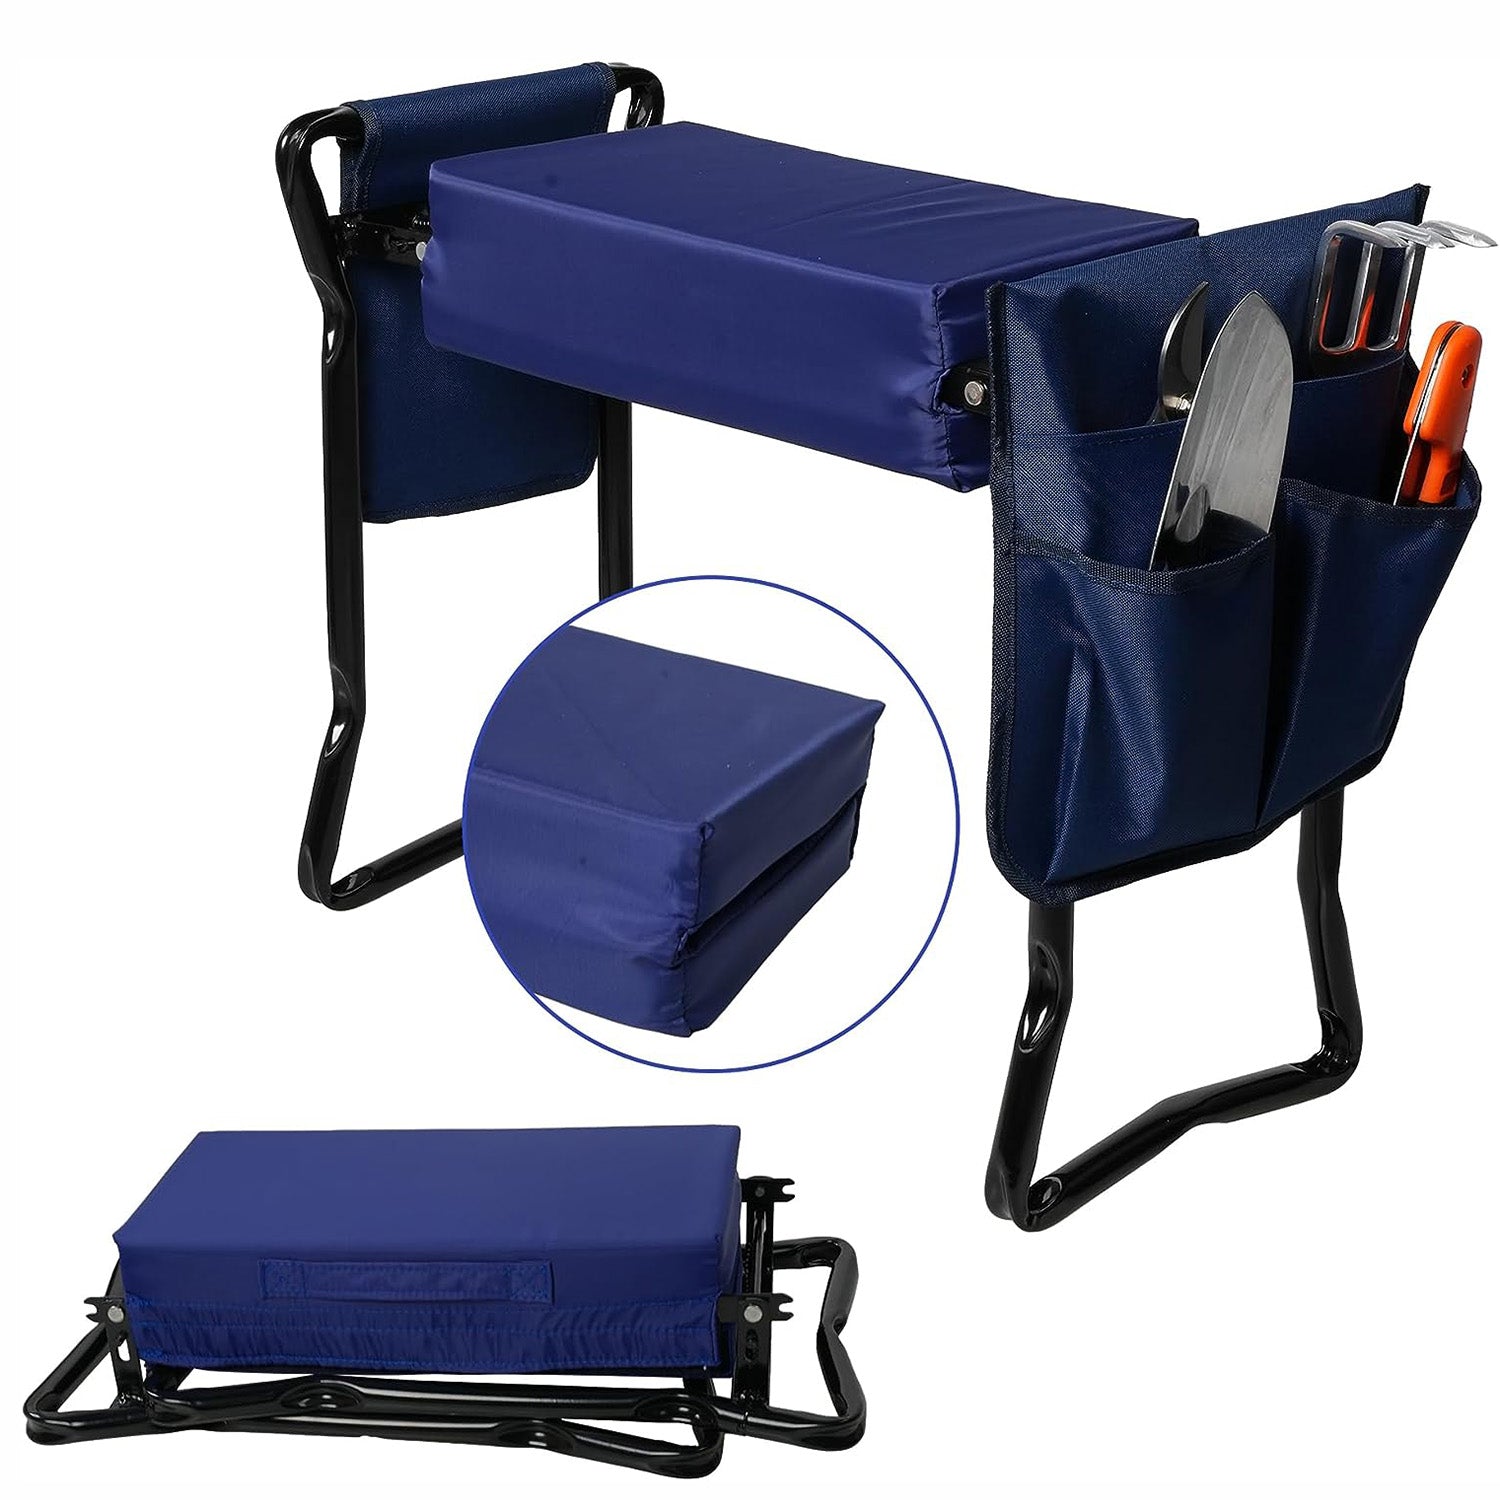 LUCKYERMORE Wider Garden Kneeler Folding Garden Stools Bench and Seat with 2 Tool Pouches, Blue